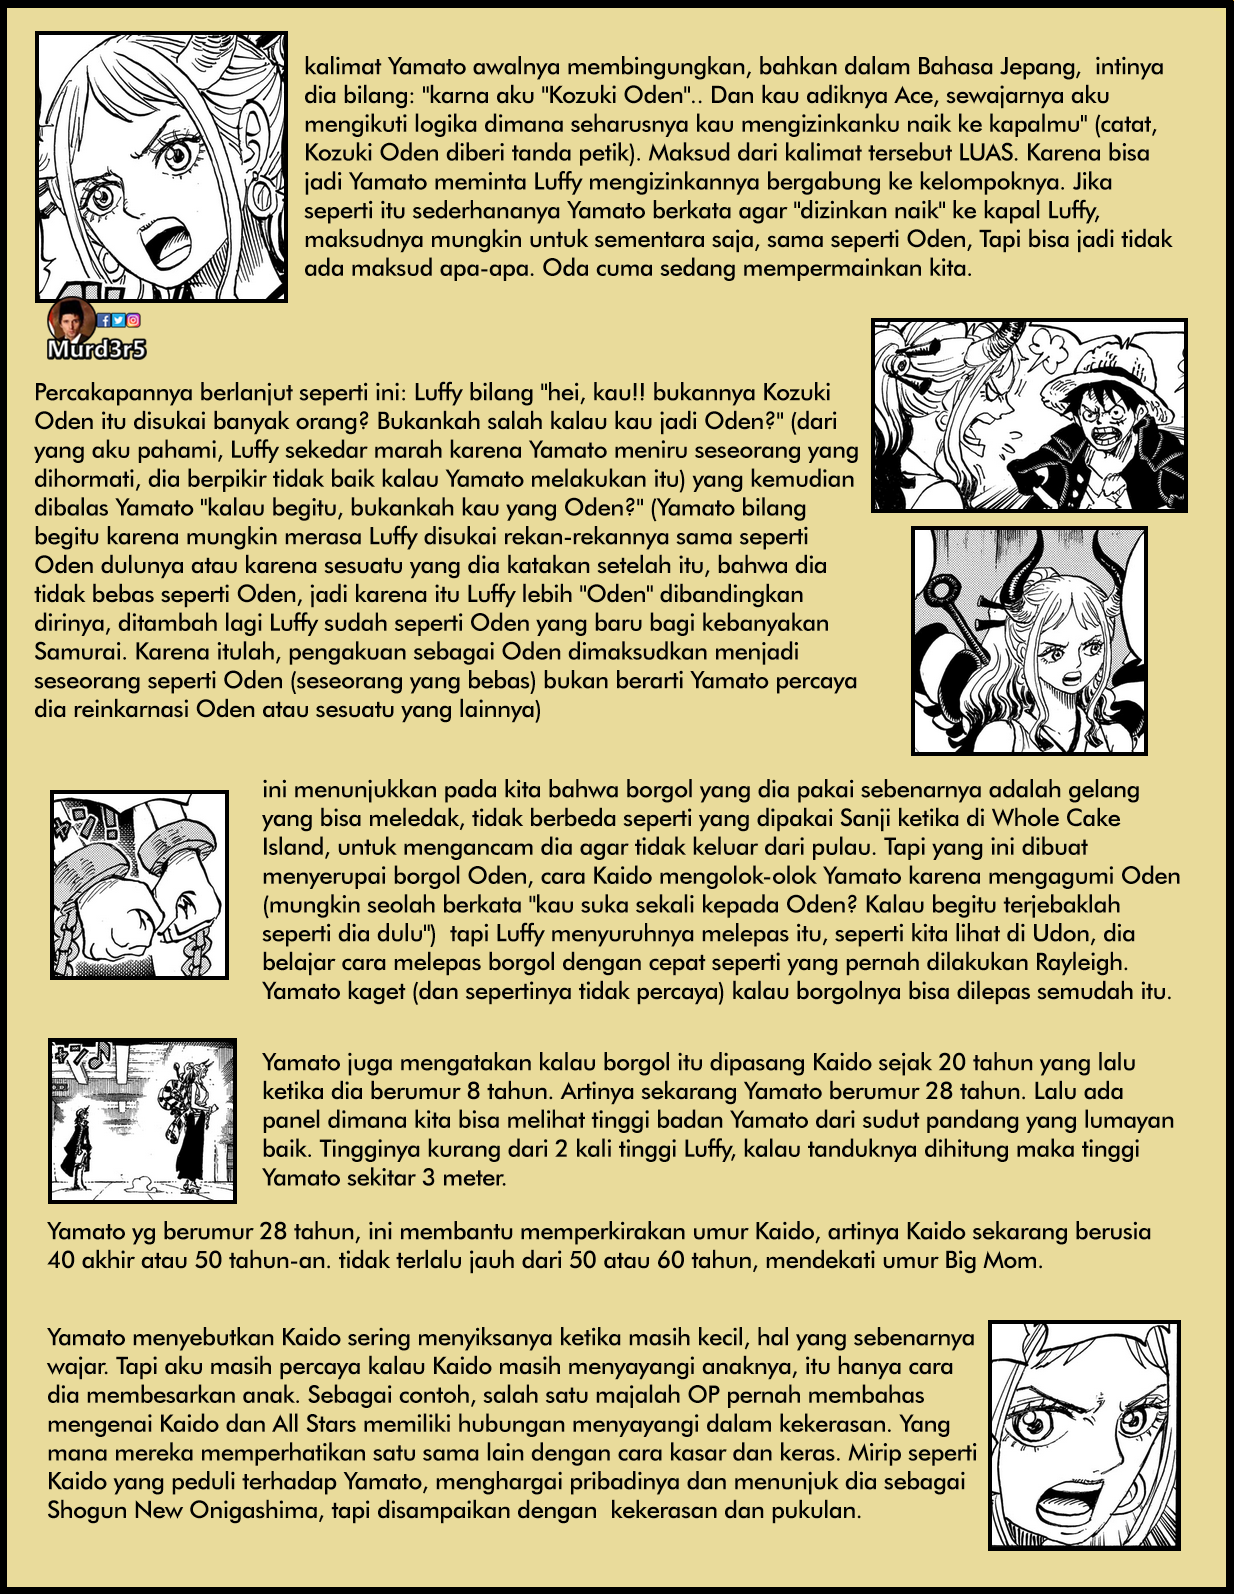 one-piece-chapter-985-in-depth-analysis-3